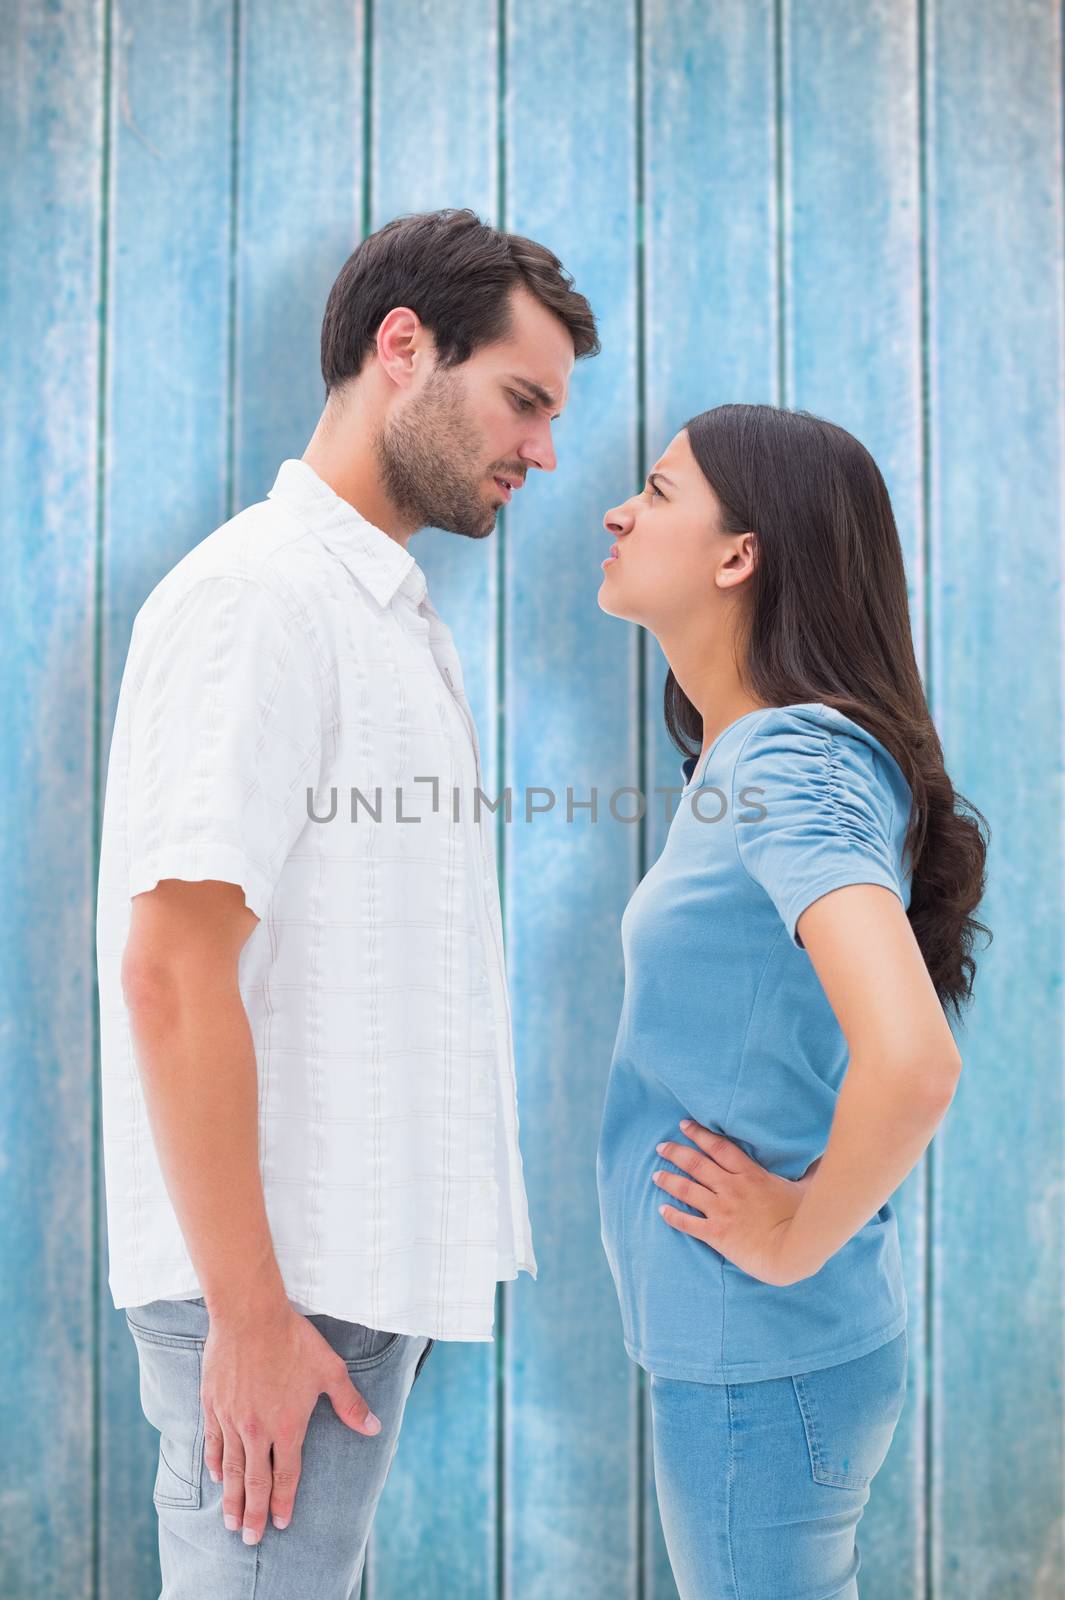 Angry couple staring at each other against wooden planks